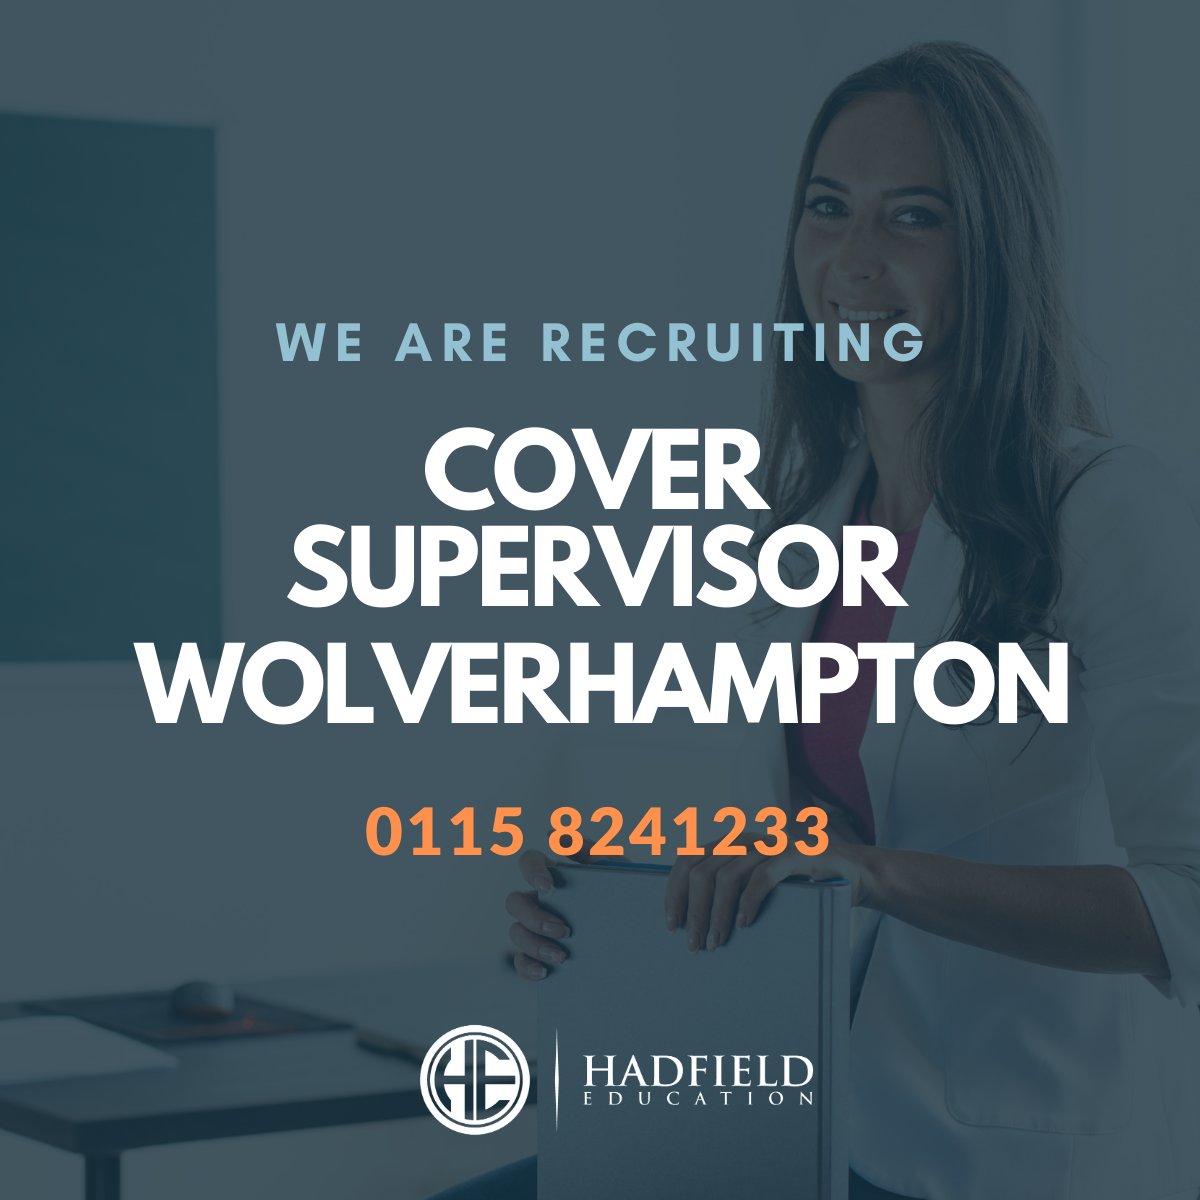 🌟 Fantastic job opportunity! 🌟 We're looking for a Cover Supervisor in 📍Wolverhampton 🎓 Apply now and make a difference! 💼 #WolverhamptonJobs #TeachingJobs #CoverSupervisorJobs 🚀 bit.ly/3OS5WYX